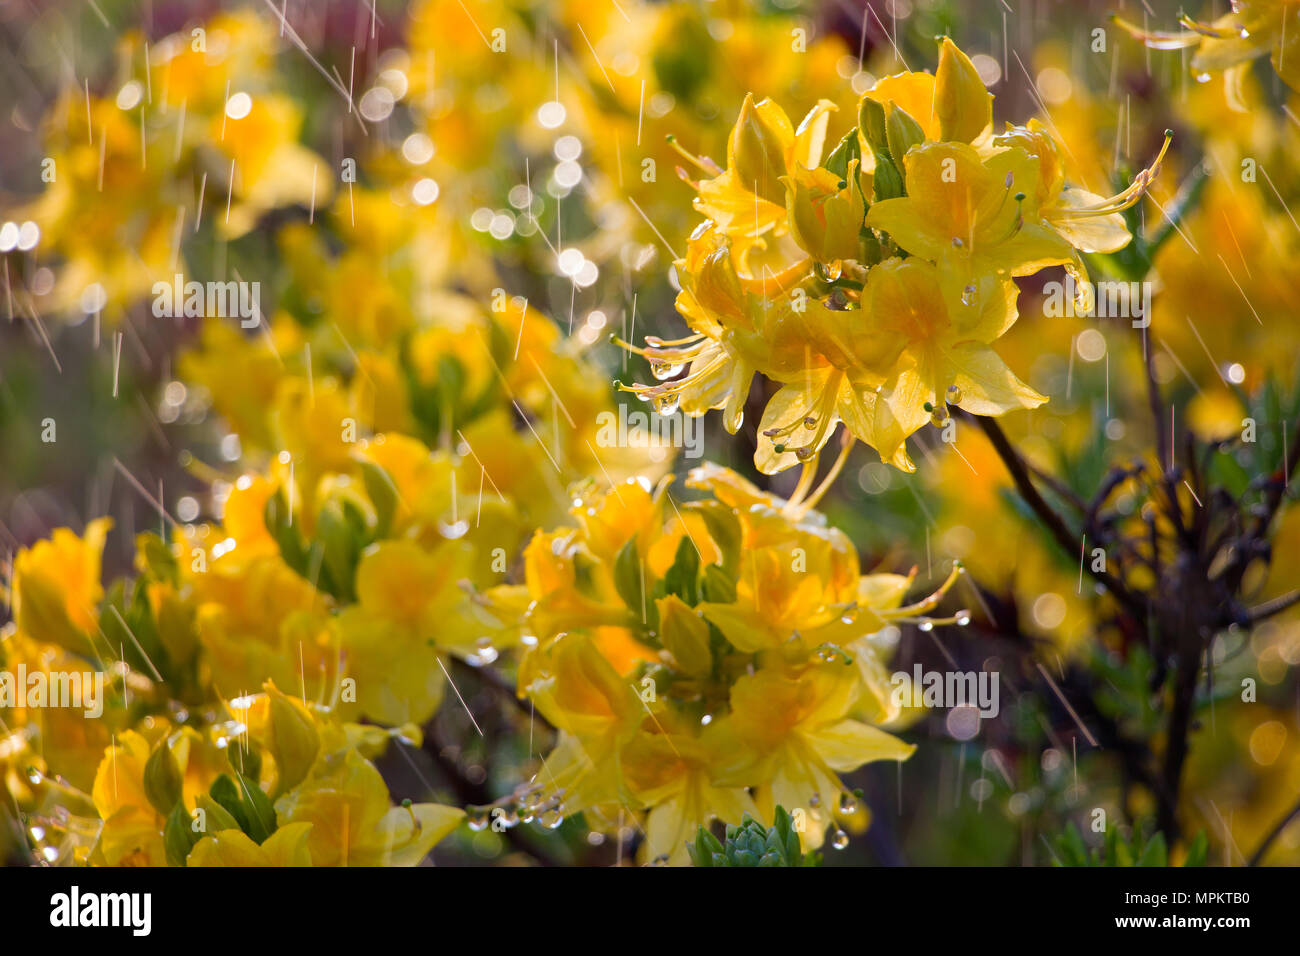 Yelow rhododendron flowers under the rain Stock Photo